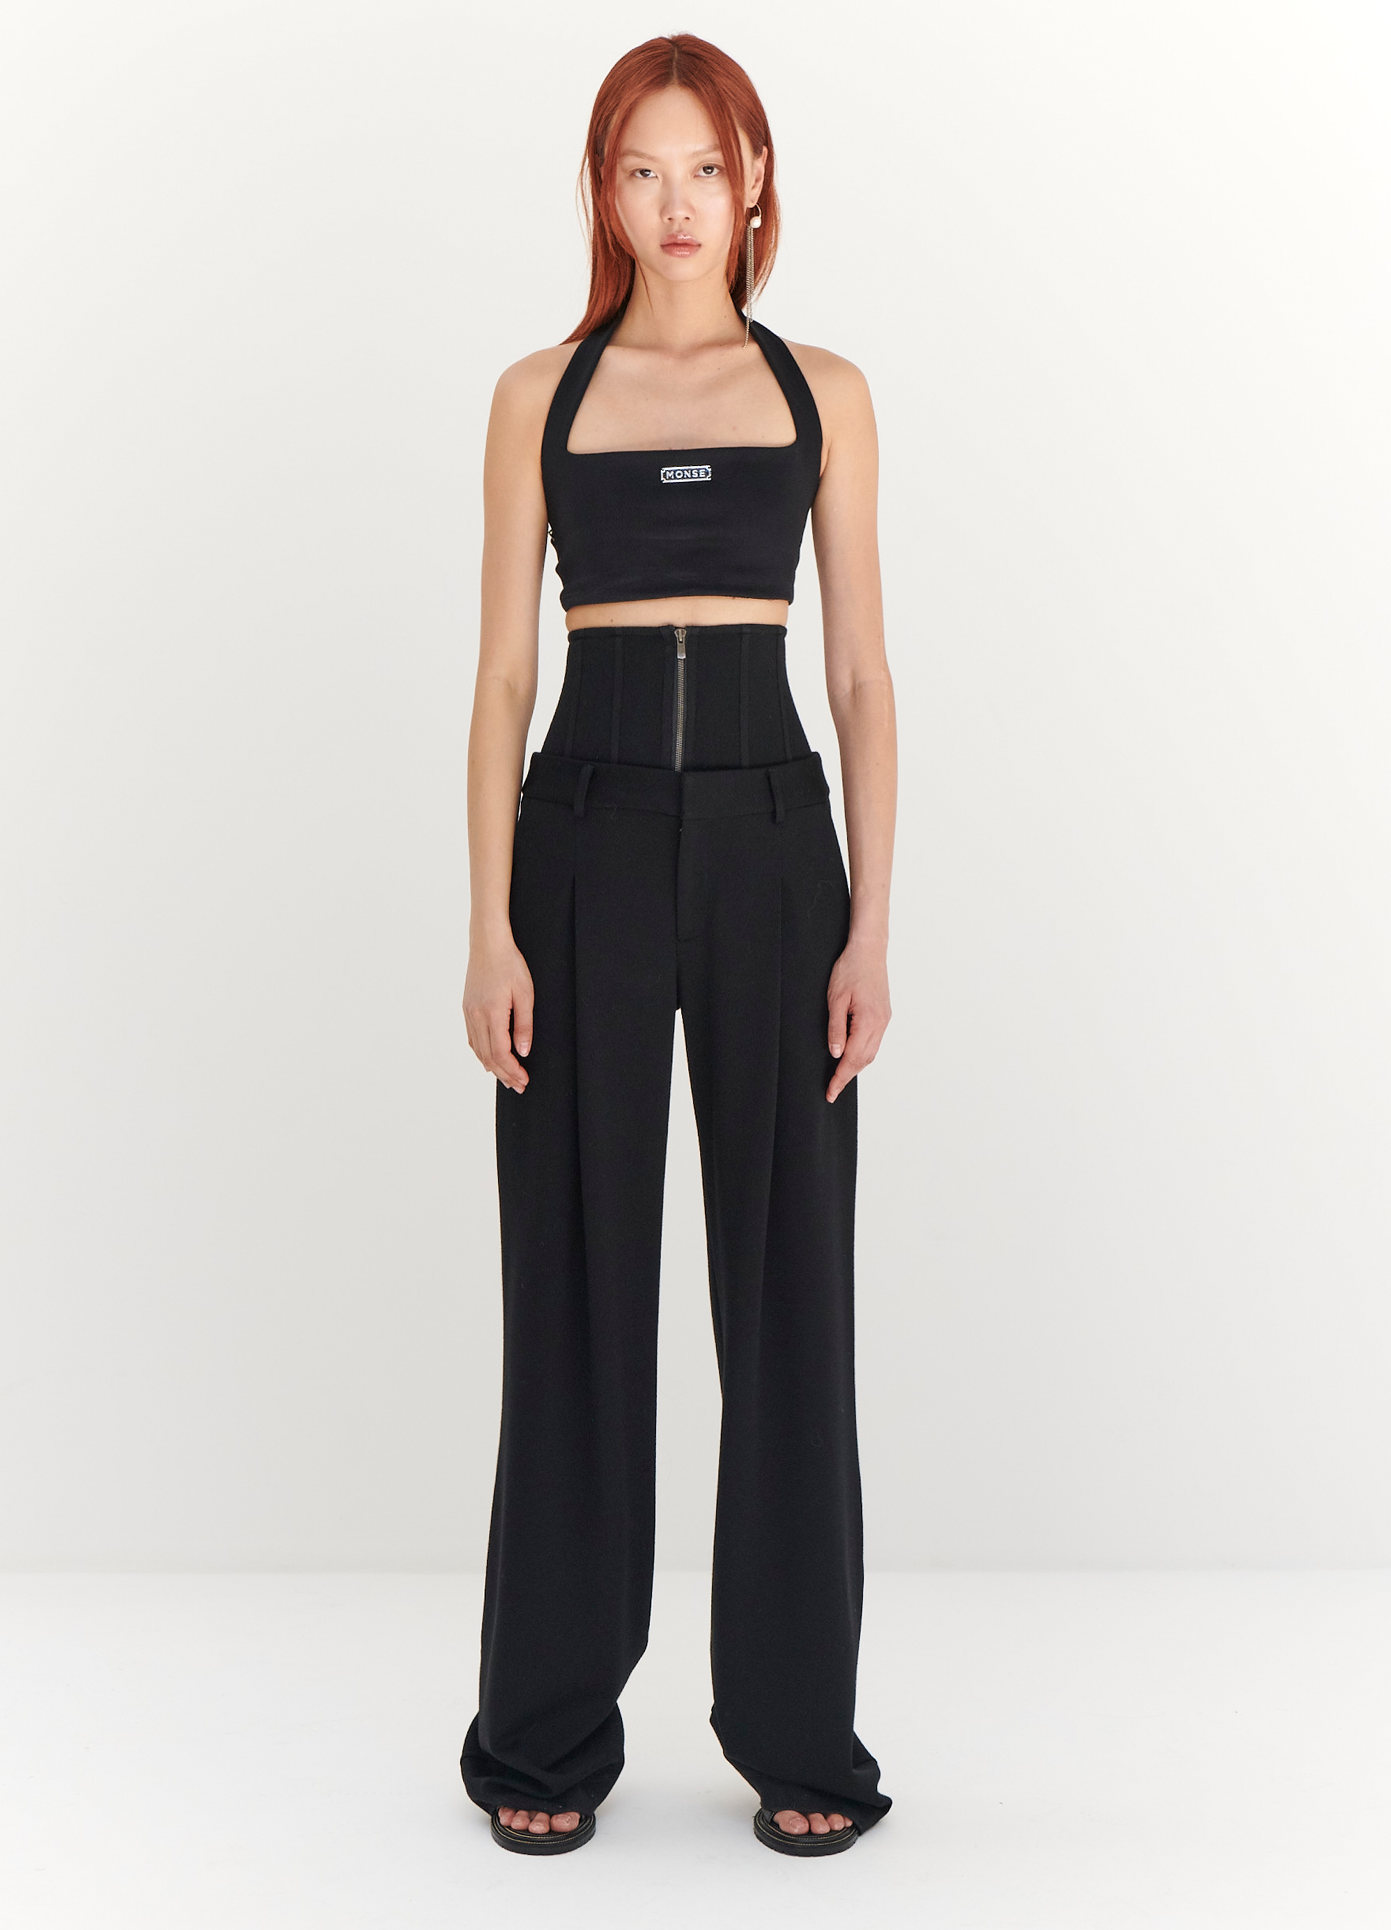 MONSE Jersey Bustier Trousers in Black on model full front view